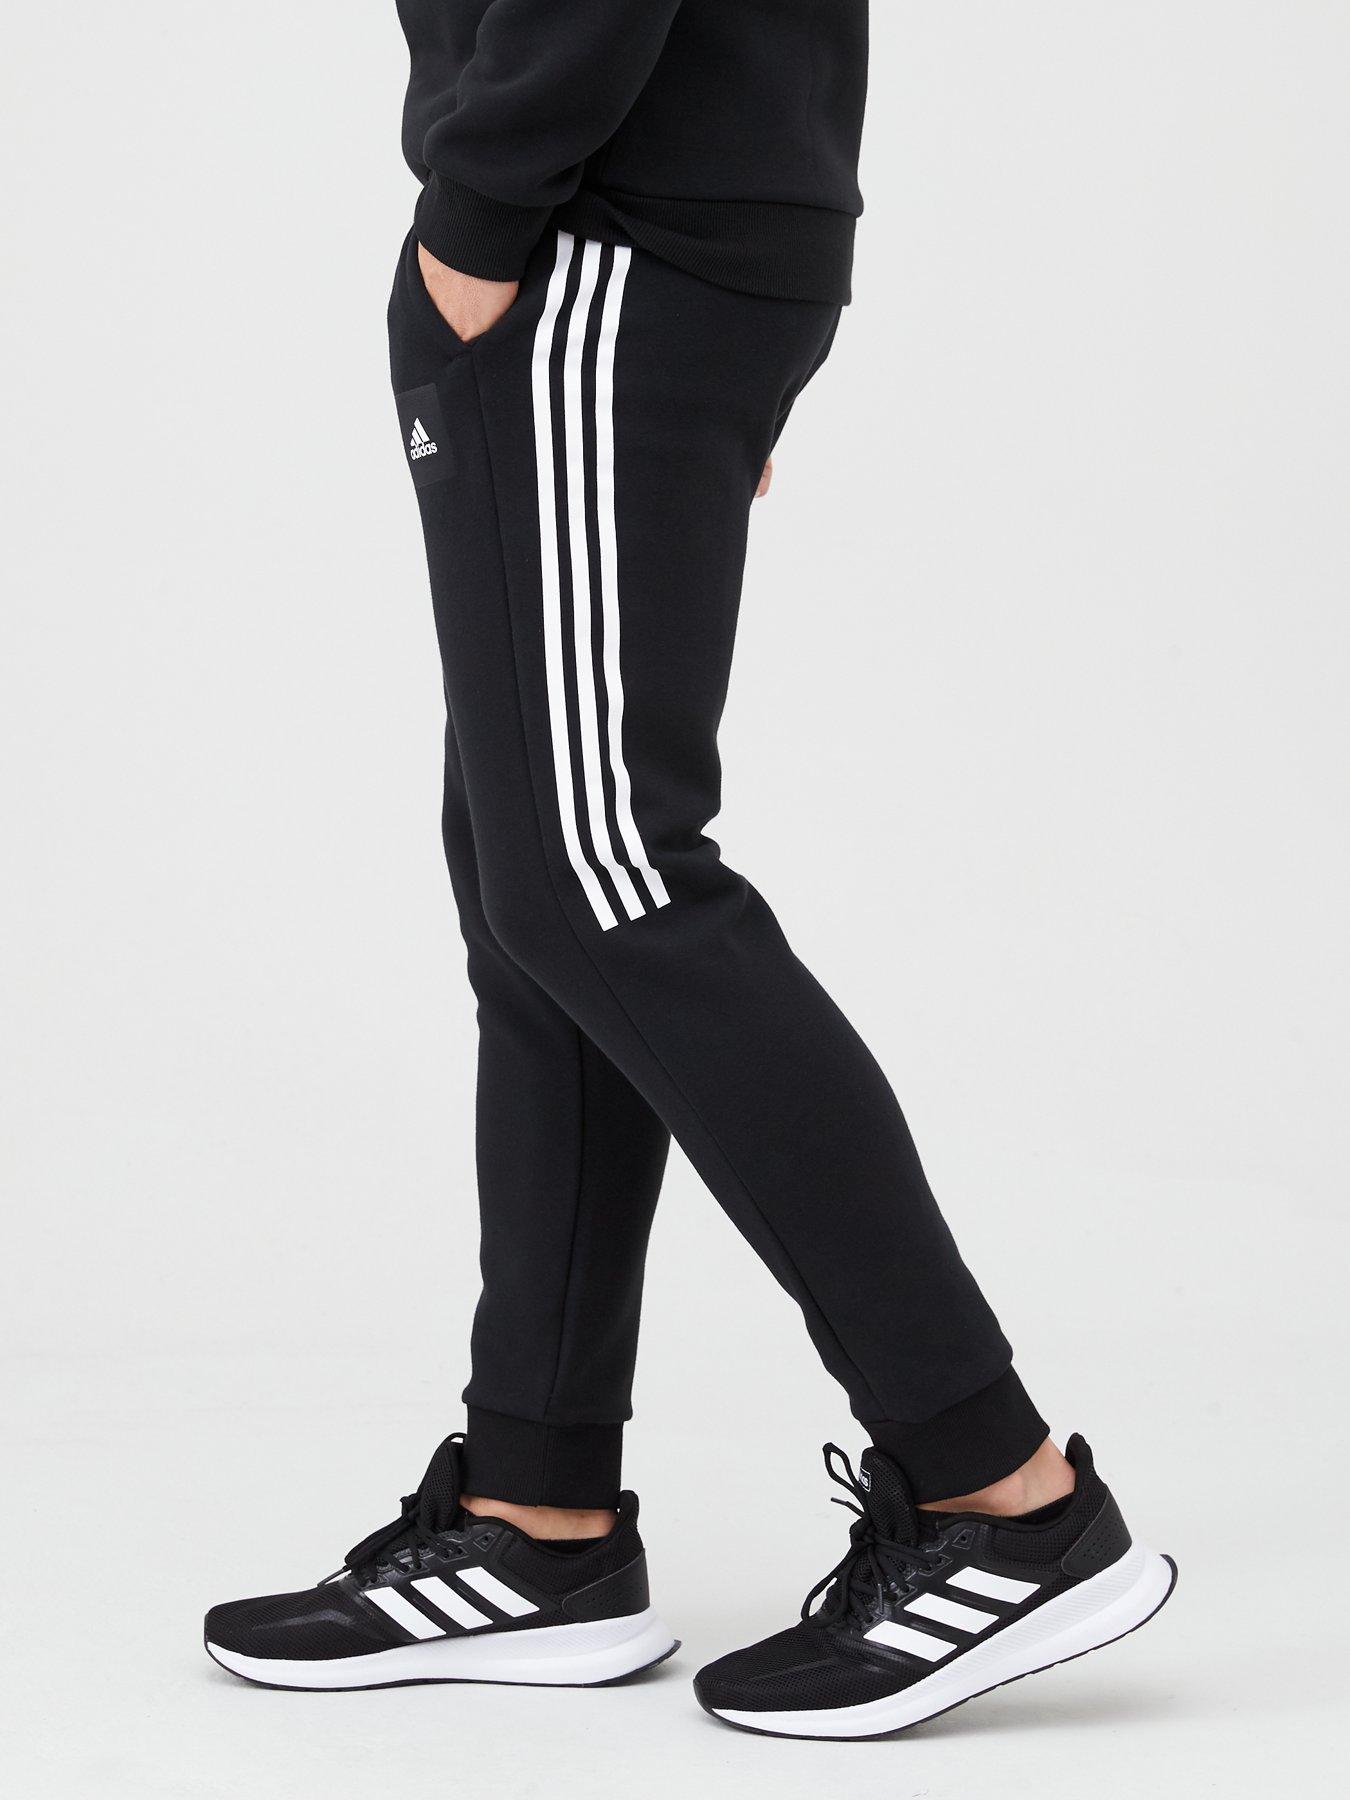 shoes to wear with adidas pants